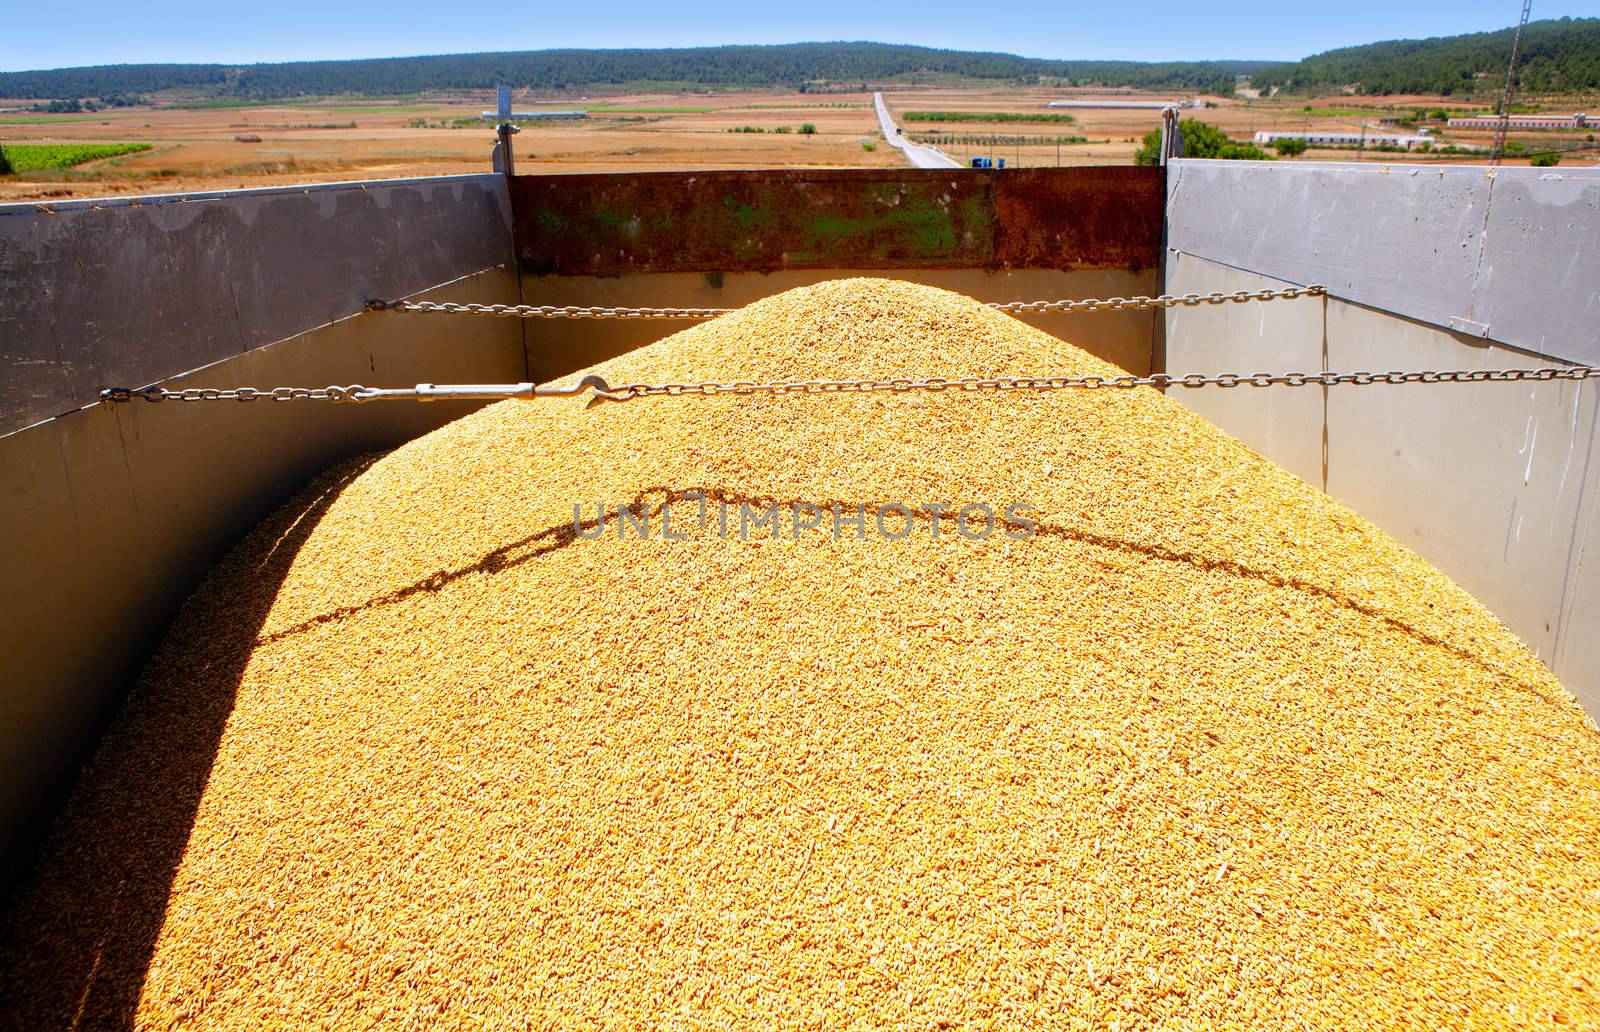 cereal harvest wheat mound in transportation truck